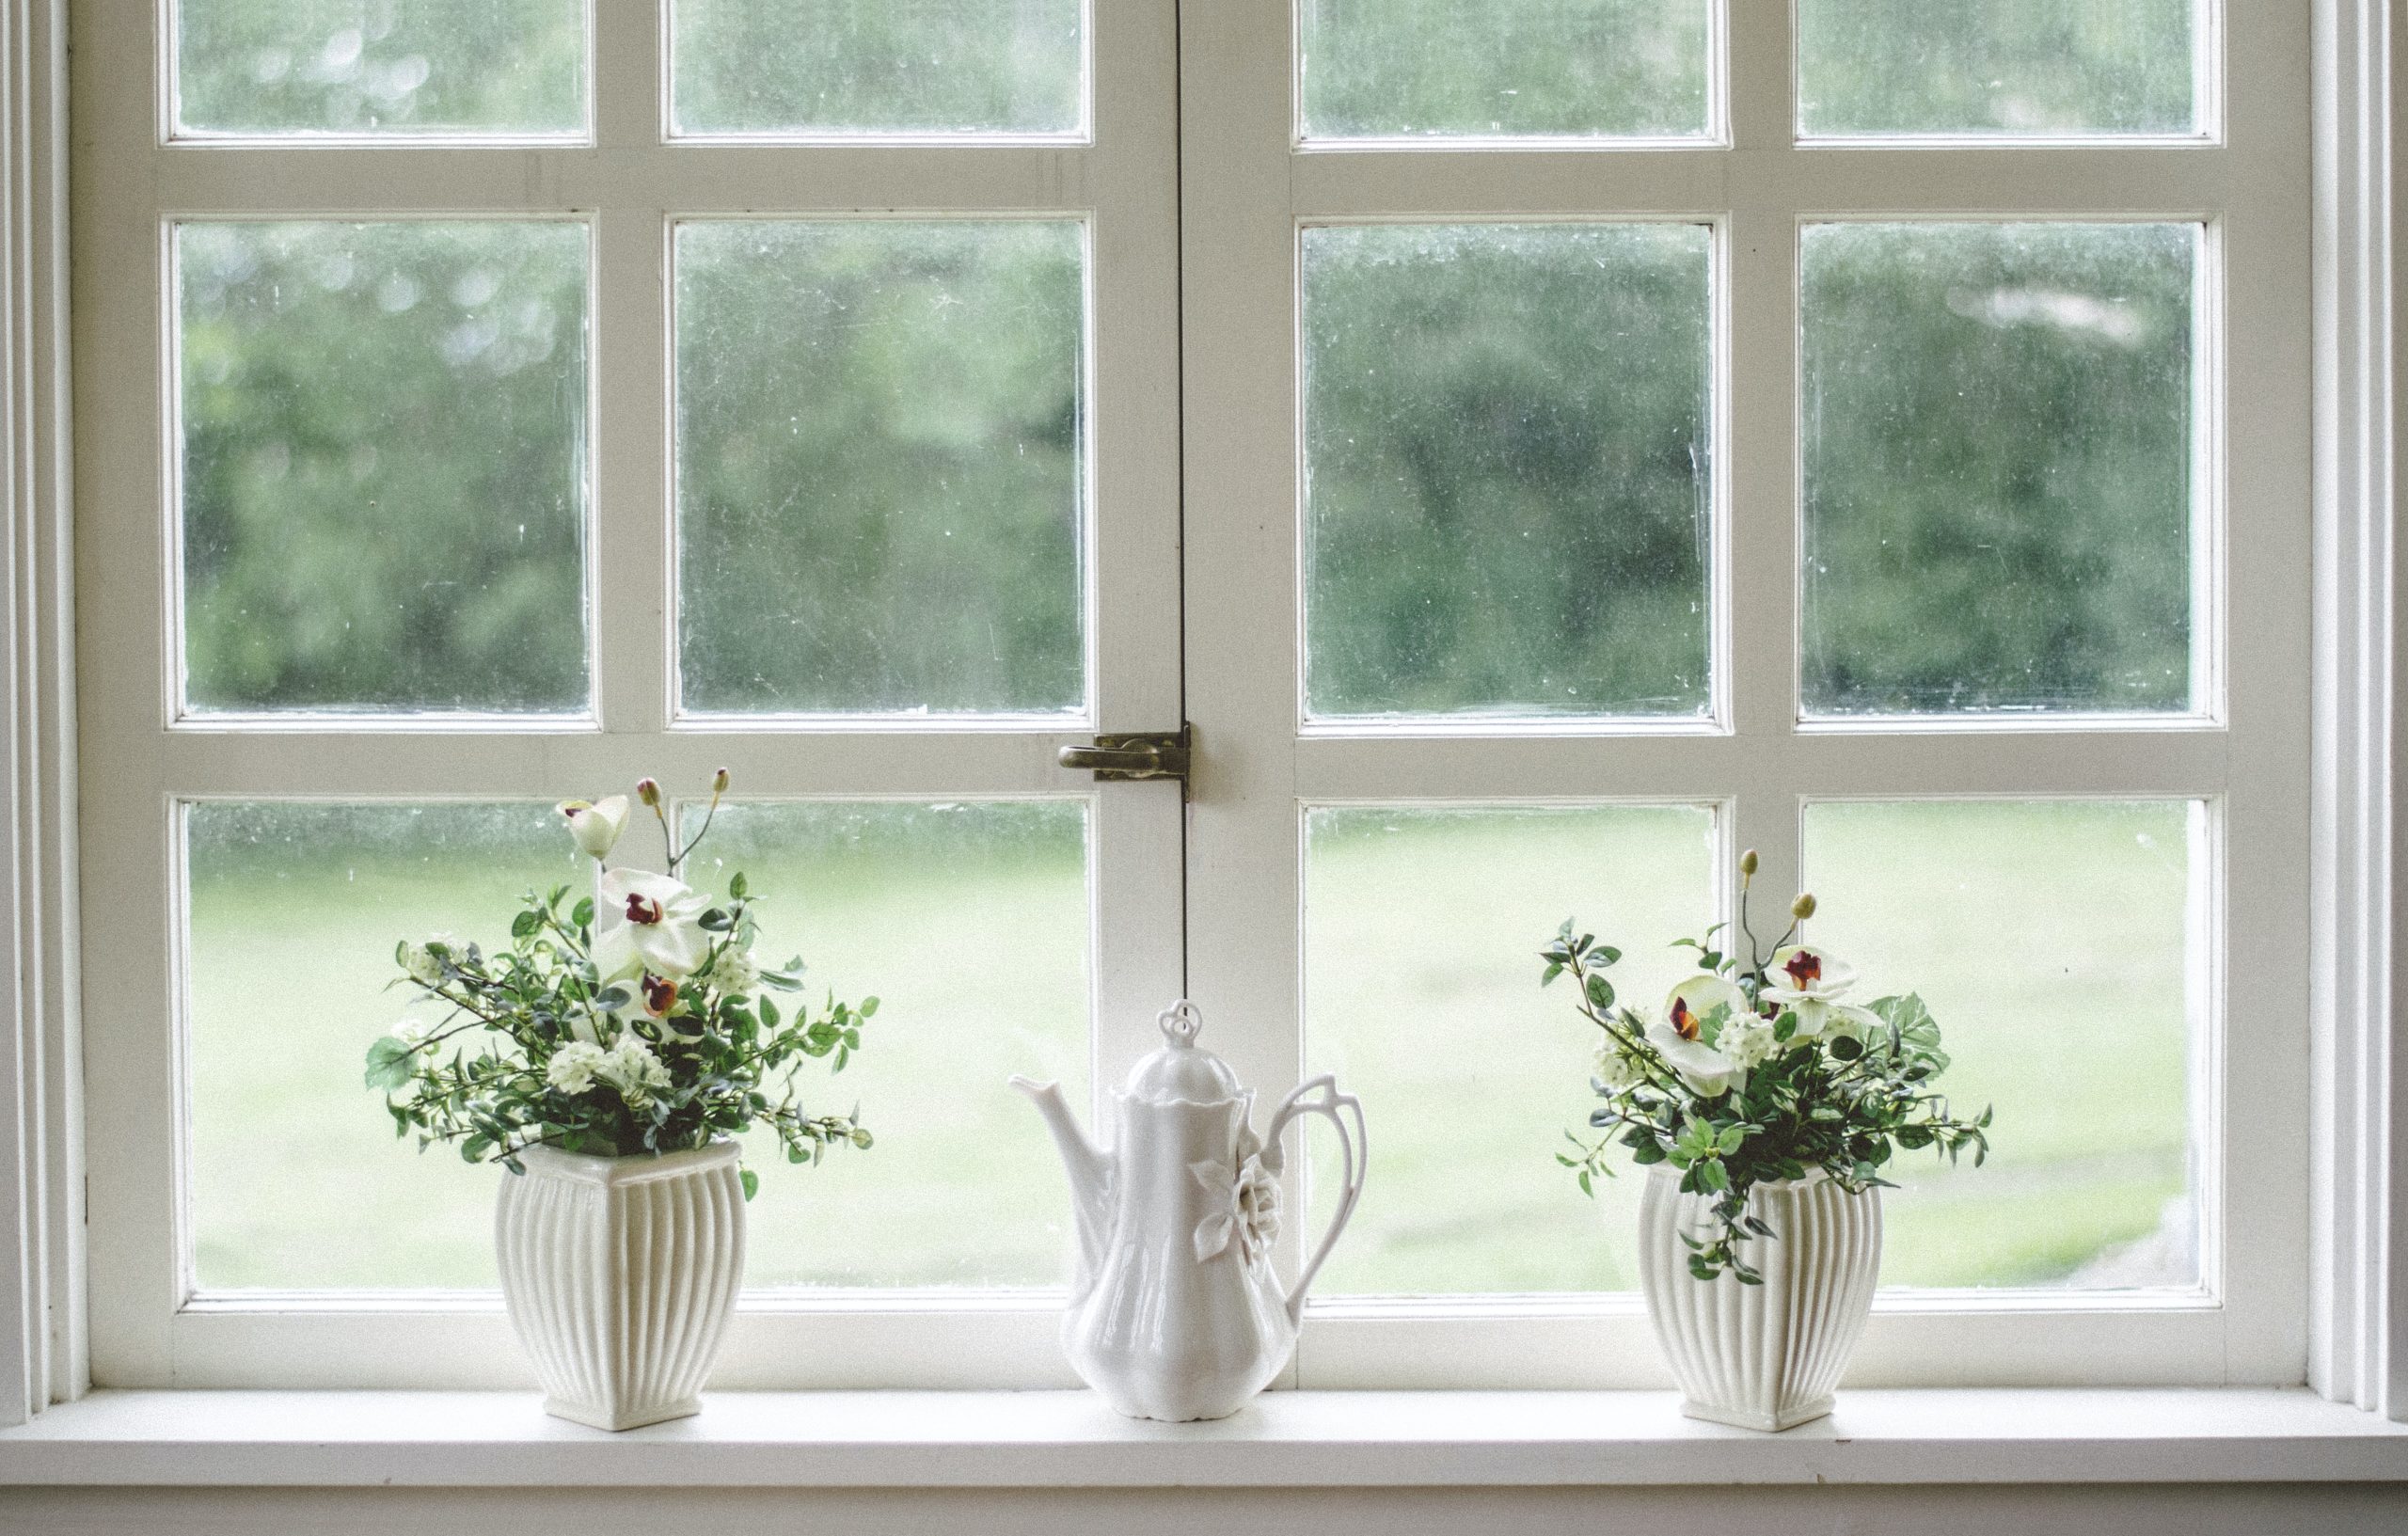 Top tips for preventing mould on your windows